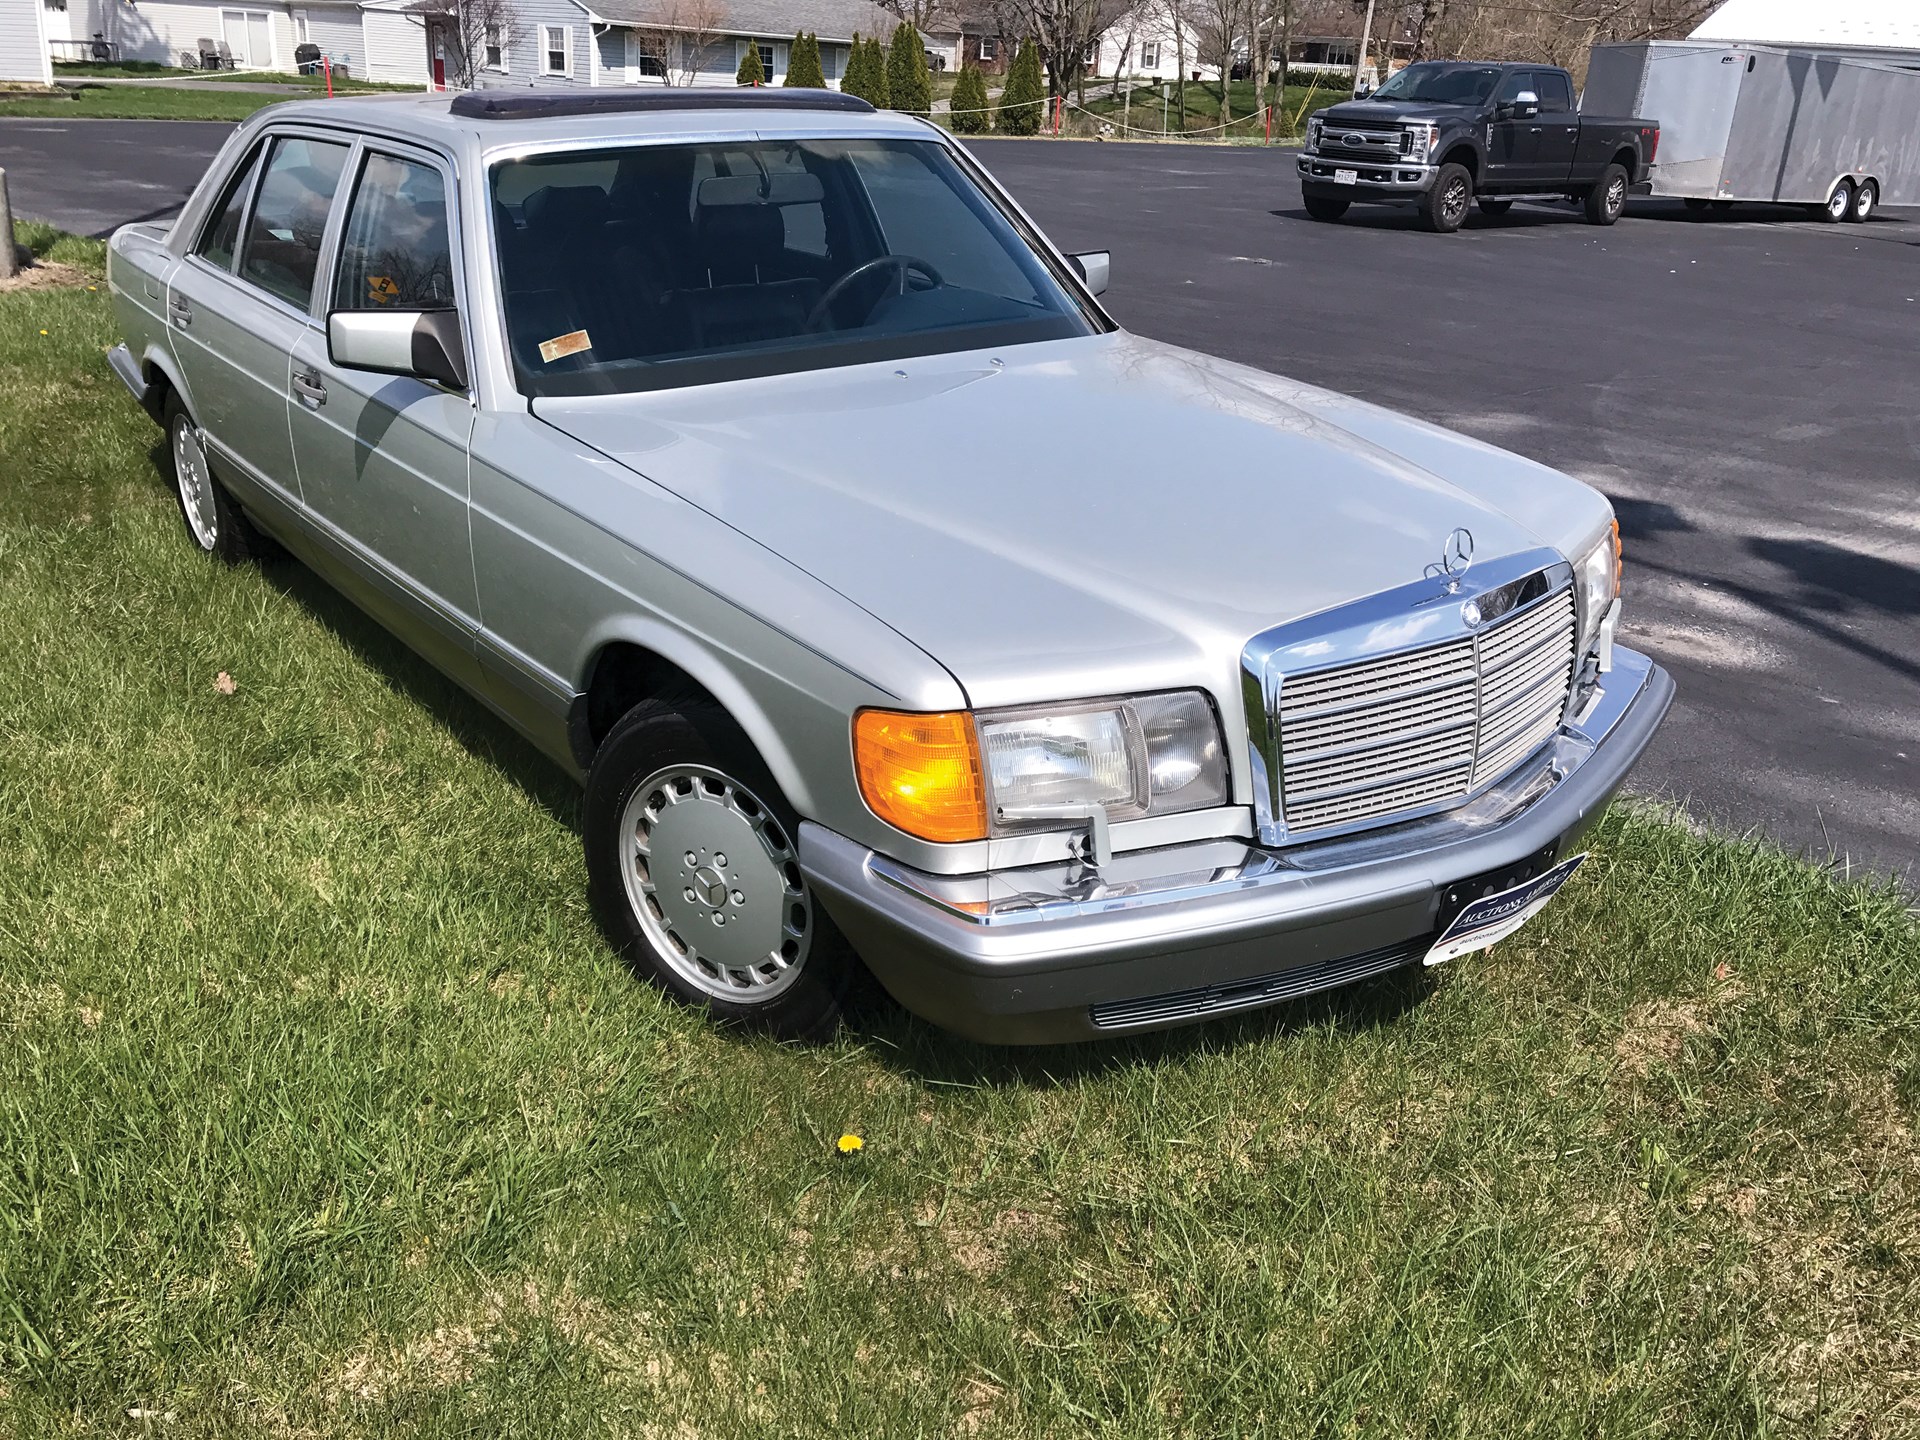 Mercedes Benz W126 For Sale In Kenya - Car View Specs